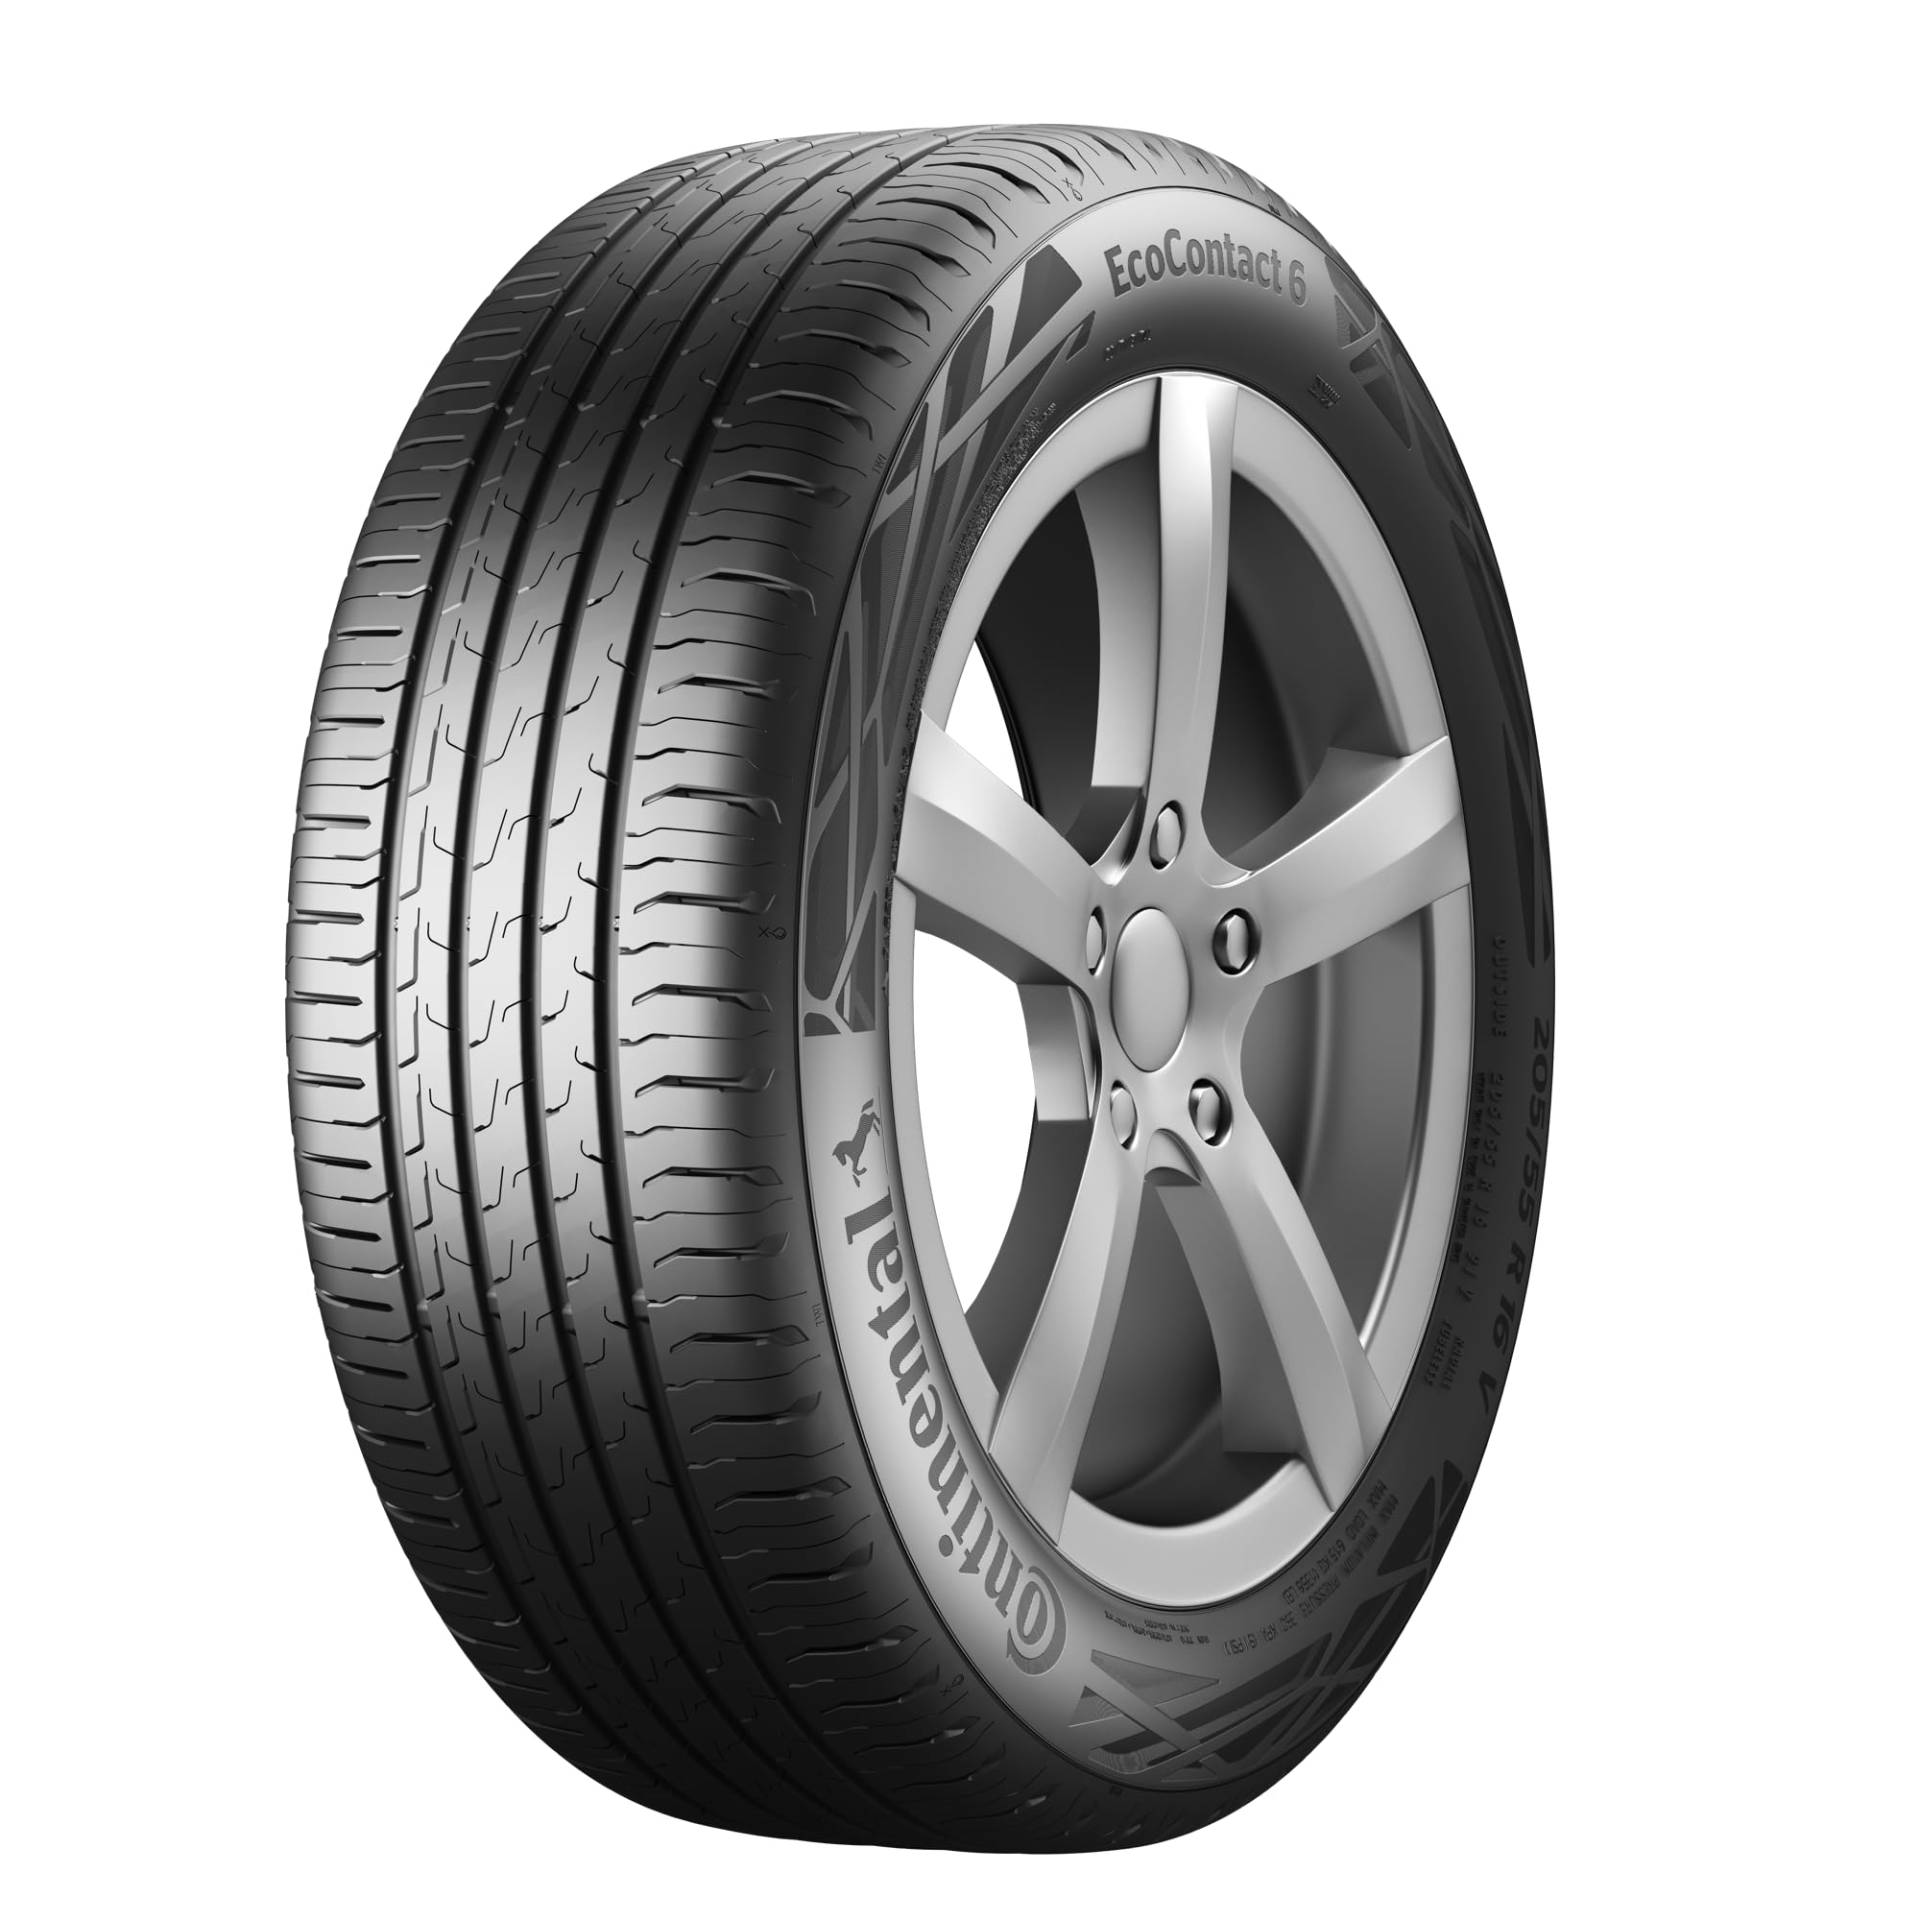 CONTINENTAL - EcoContact 6-215/50 R 19-093T/A/A/71dB - Sommerreifen von Continental